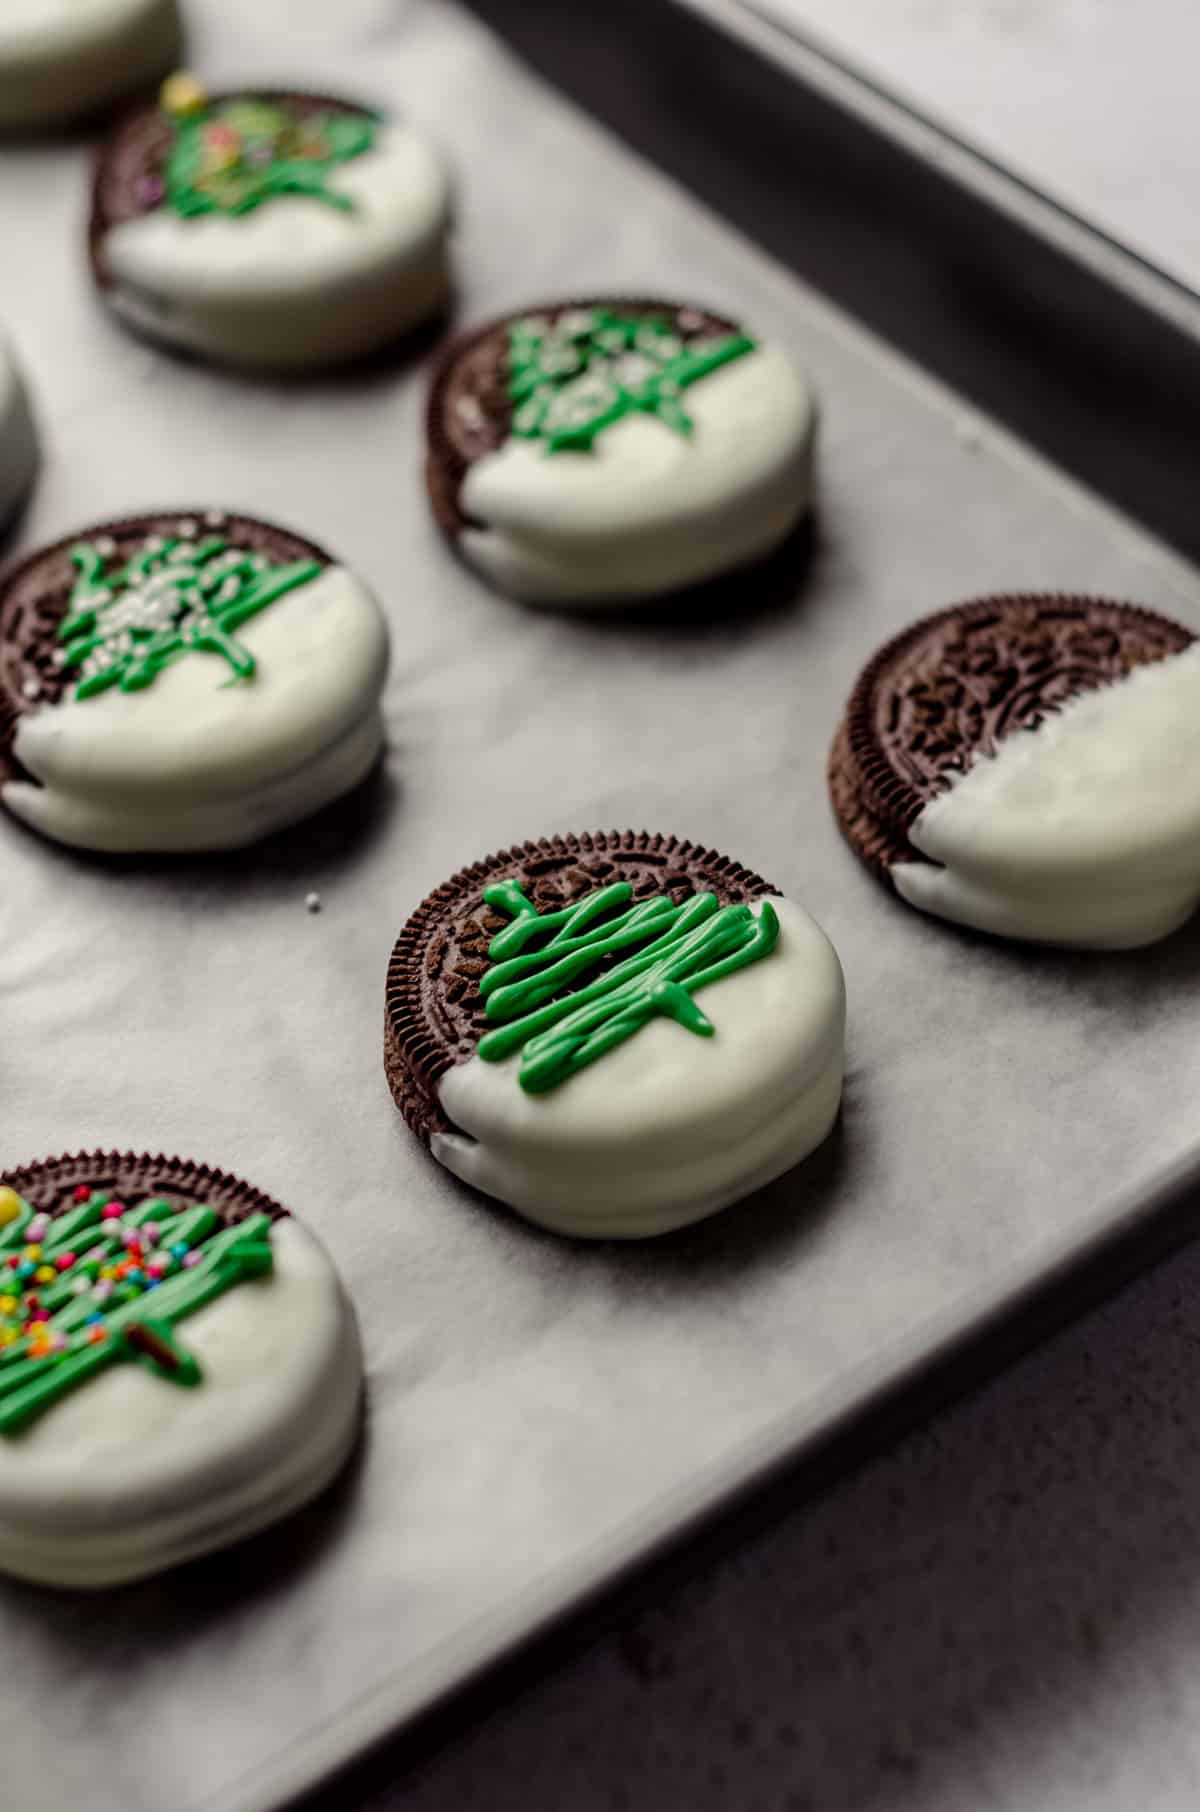 green trees piped onto white chocolate dipped oreos